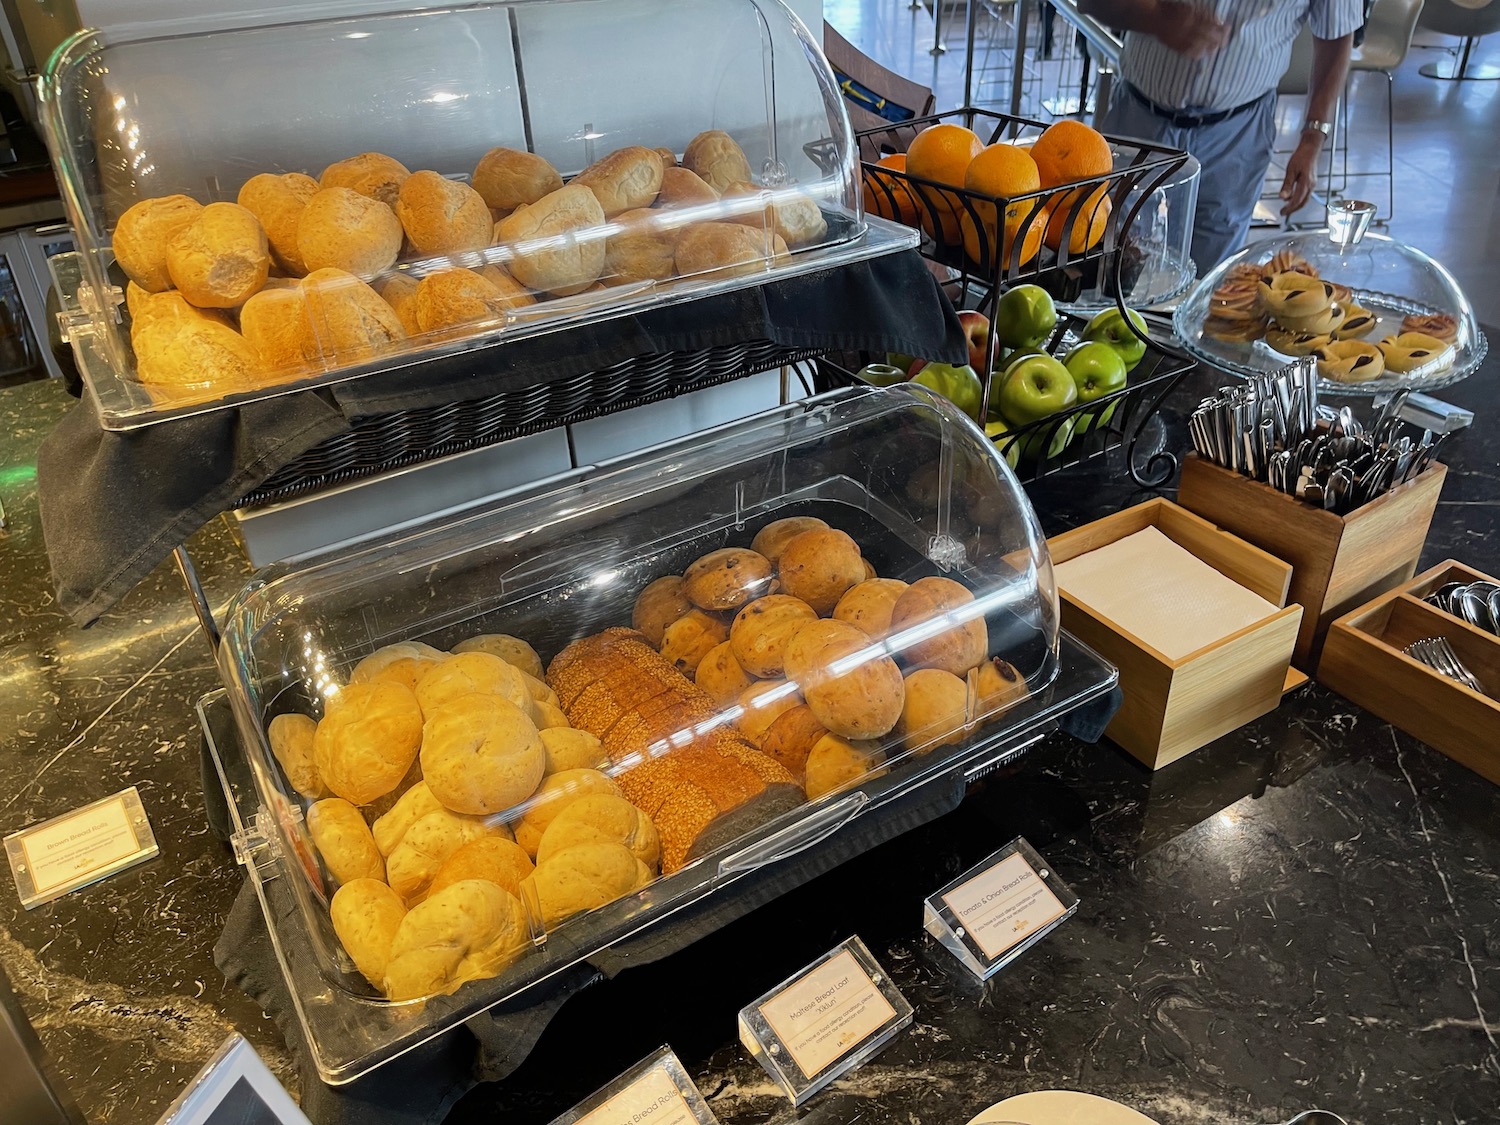 a display of bread rolls and oranges